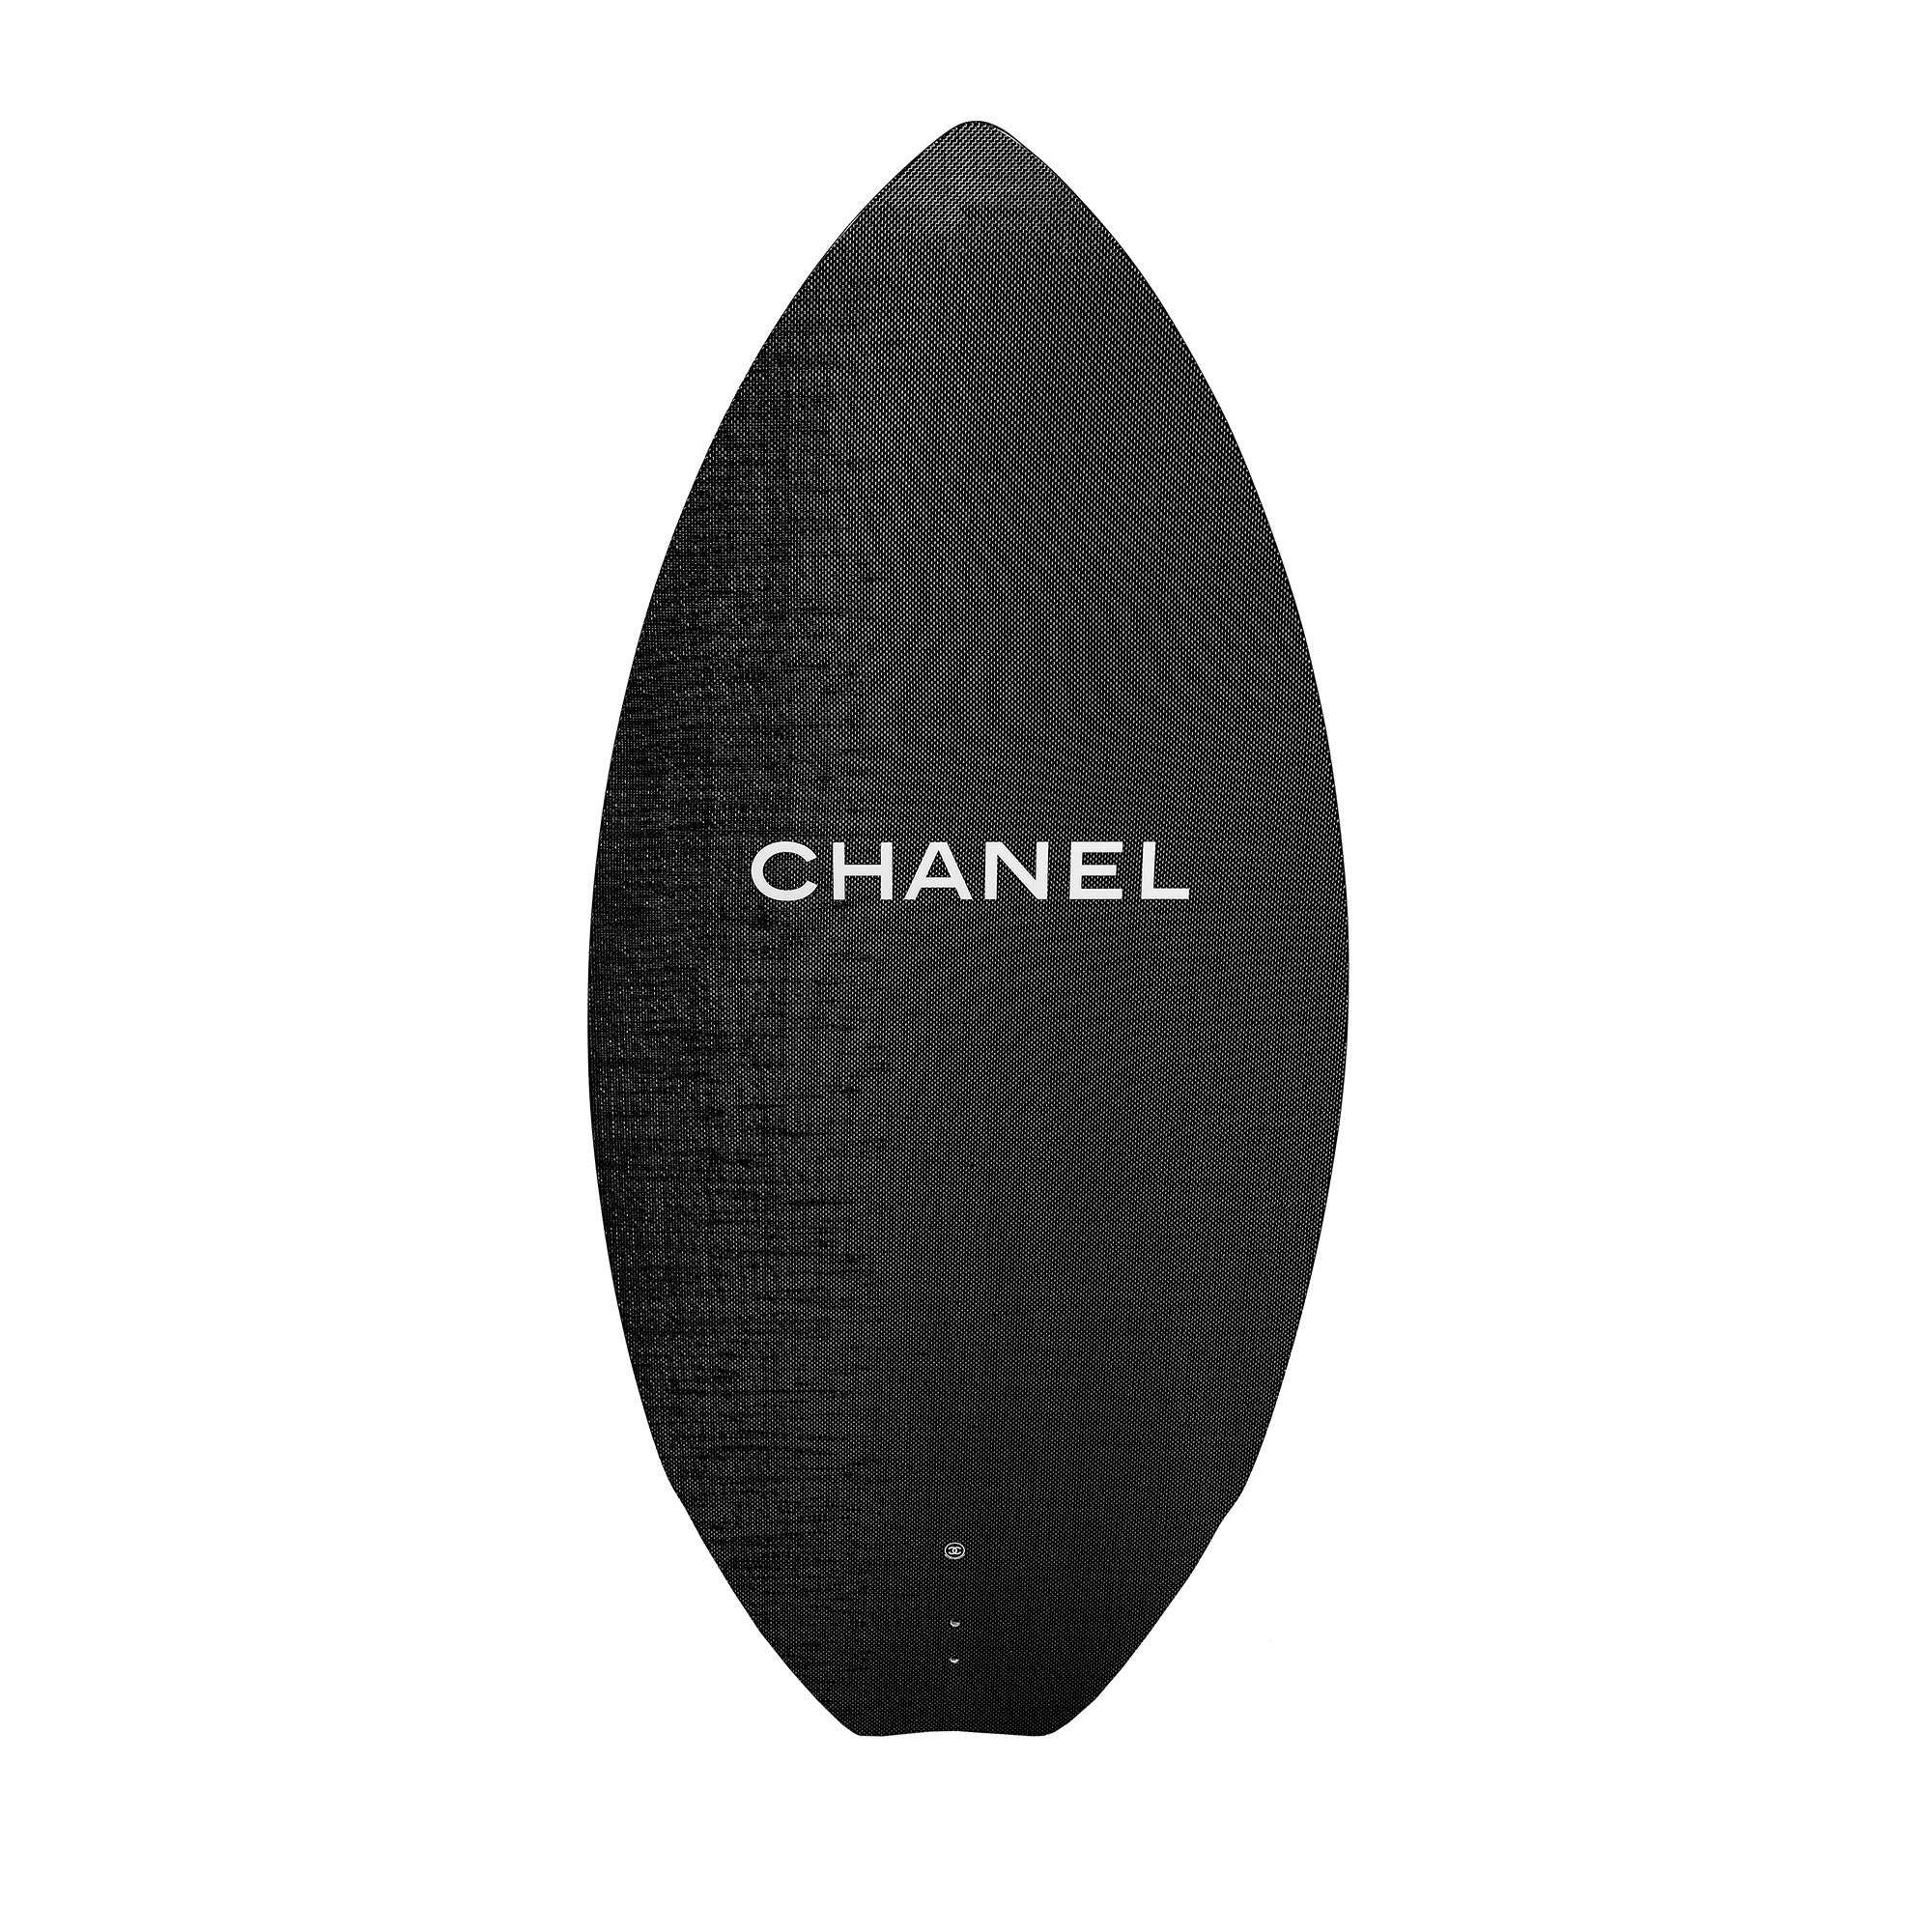 If you're someone who loves surfing and fashion, you can't miss out on this 2015 Chanel Surfboard. It's built using high-quality materials like carbon fibre, polyurethane, and fibreglass and has the iconic interlocking CC logo and Chanel branding on